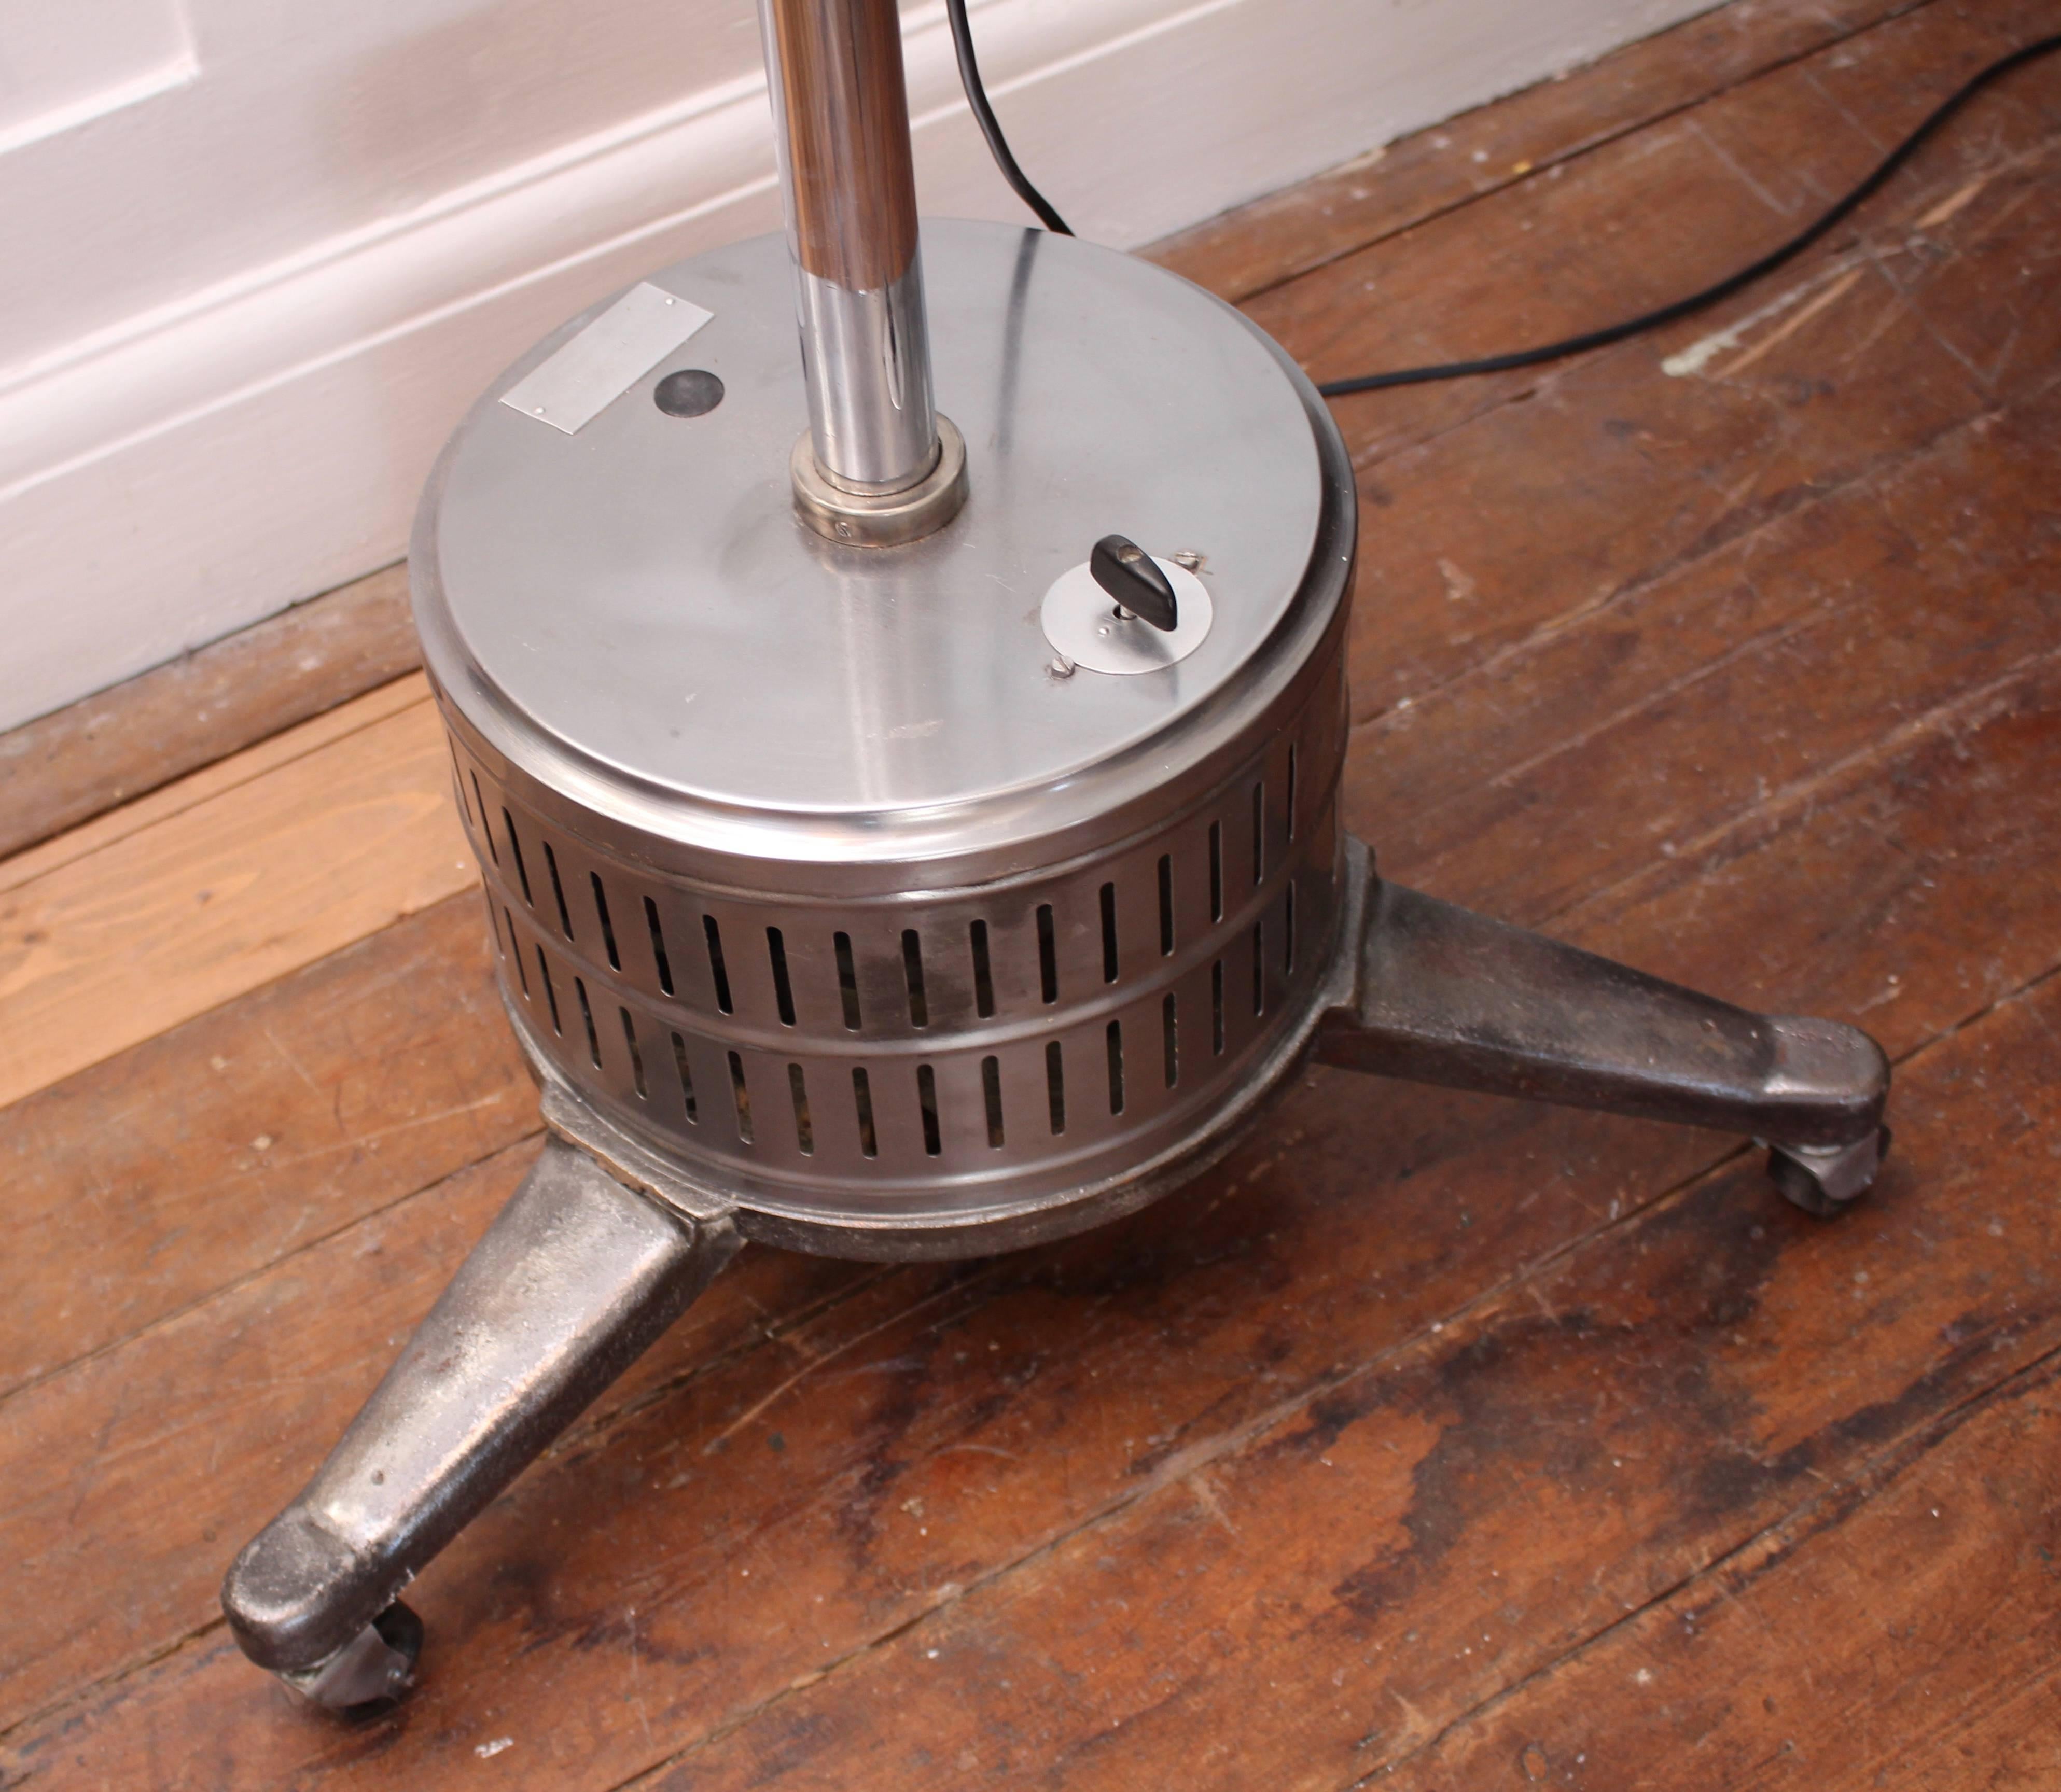 Extremely large restored medical theatre light on trolley base. This lamp is extremely heavy and really has a stylish look to it. The trolley base and light shade have been professionally stripped and polished while the light has been rewired and